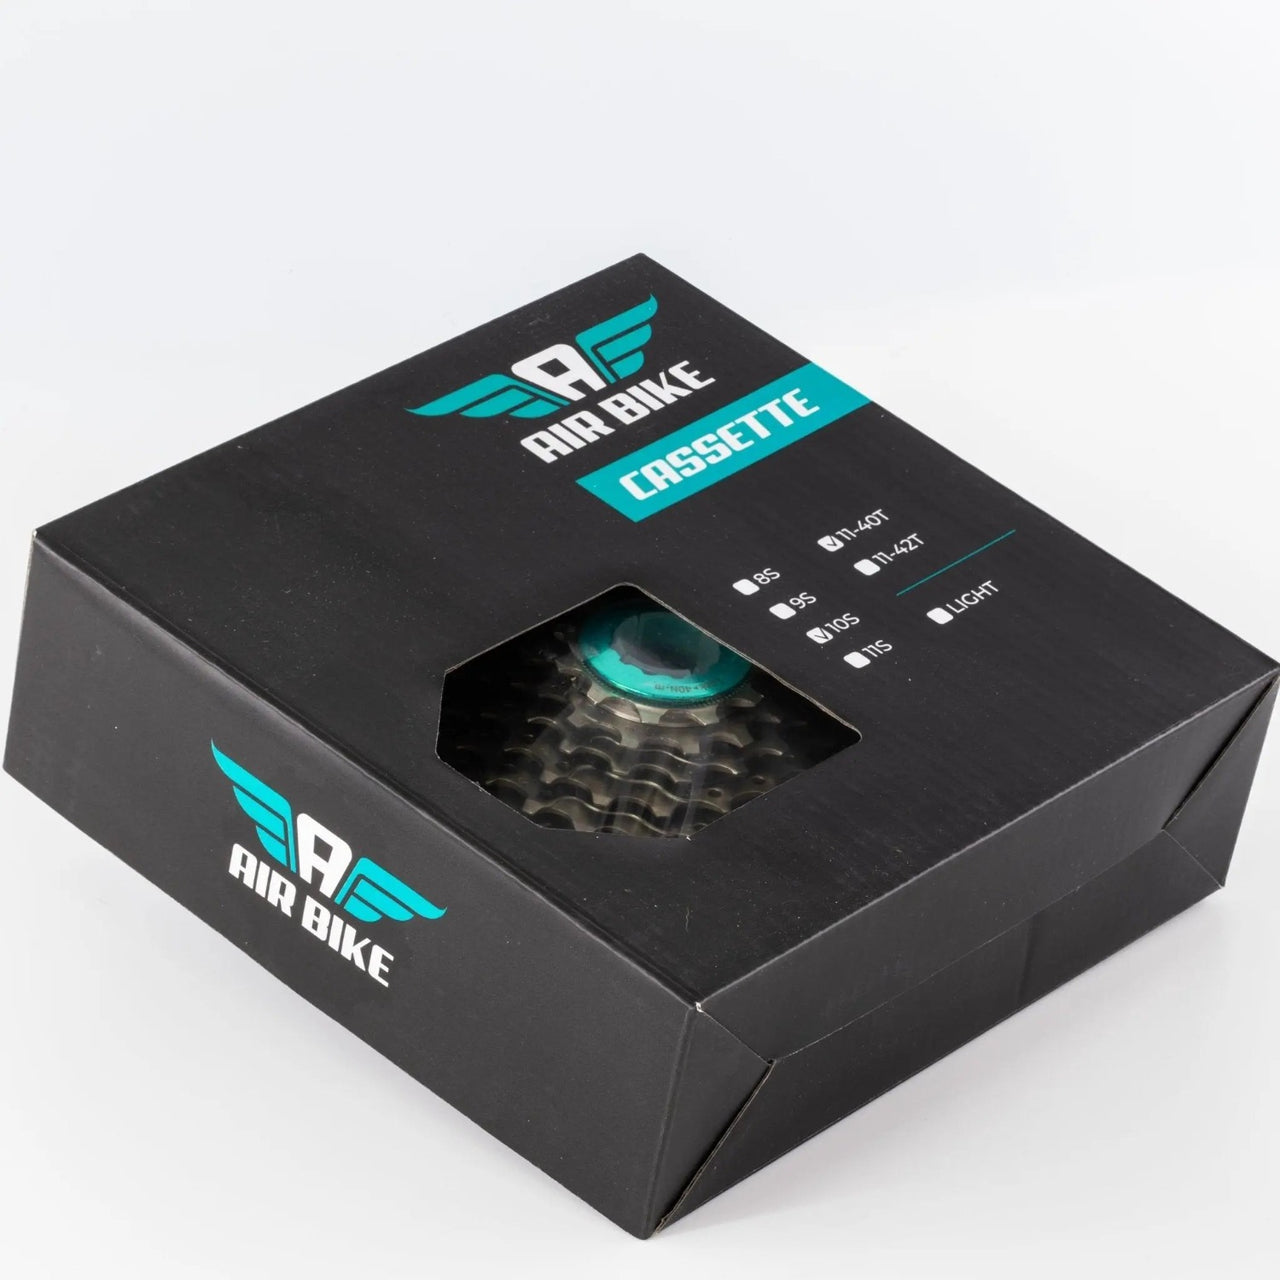 AirBike's Durable 10 Speed 11-40 Cassette in Packaging